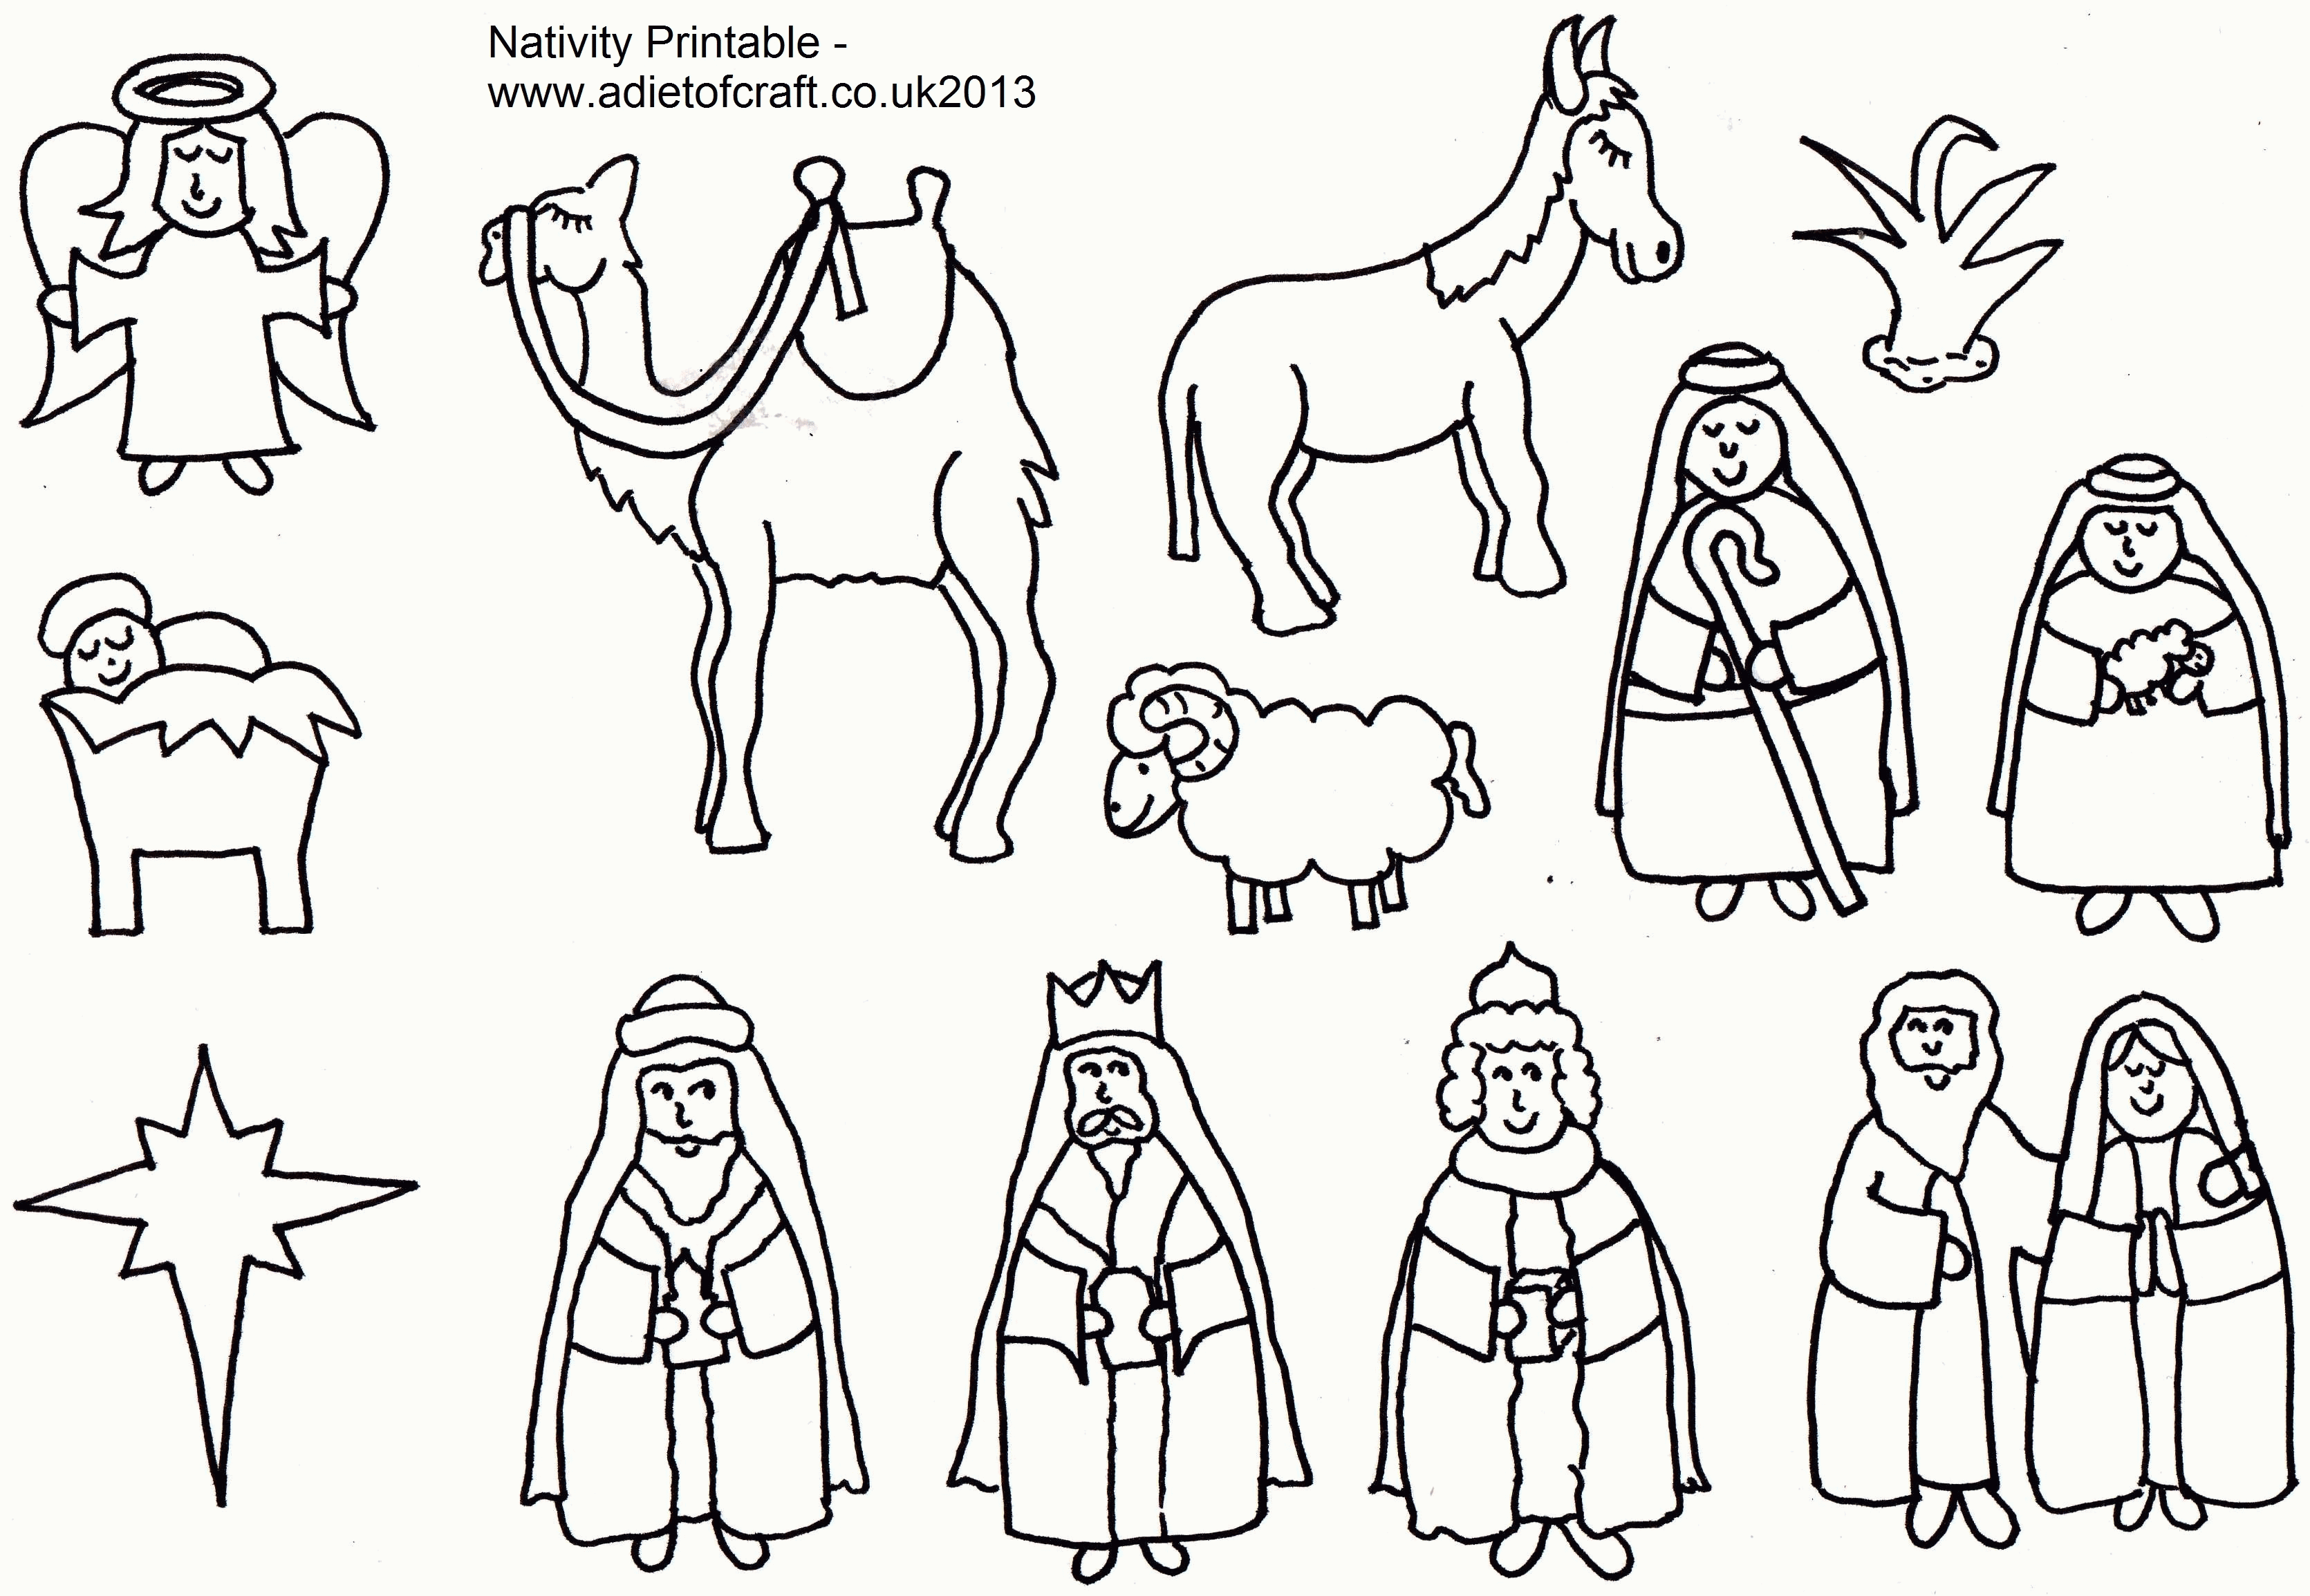 Nativity Scene Coloring Pages (18 Pictures) - Colorine.net | 18460